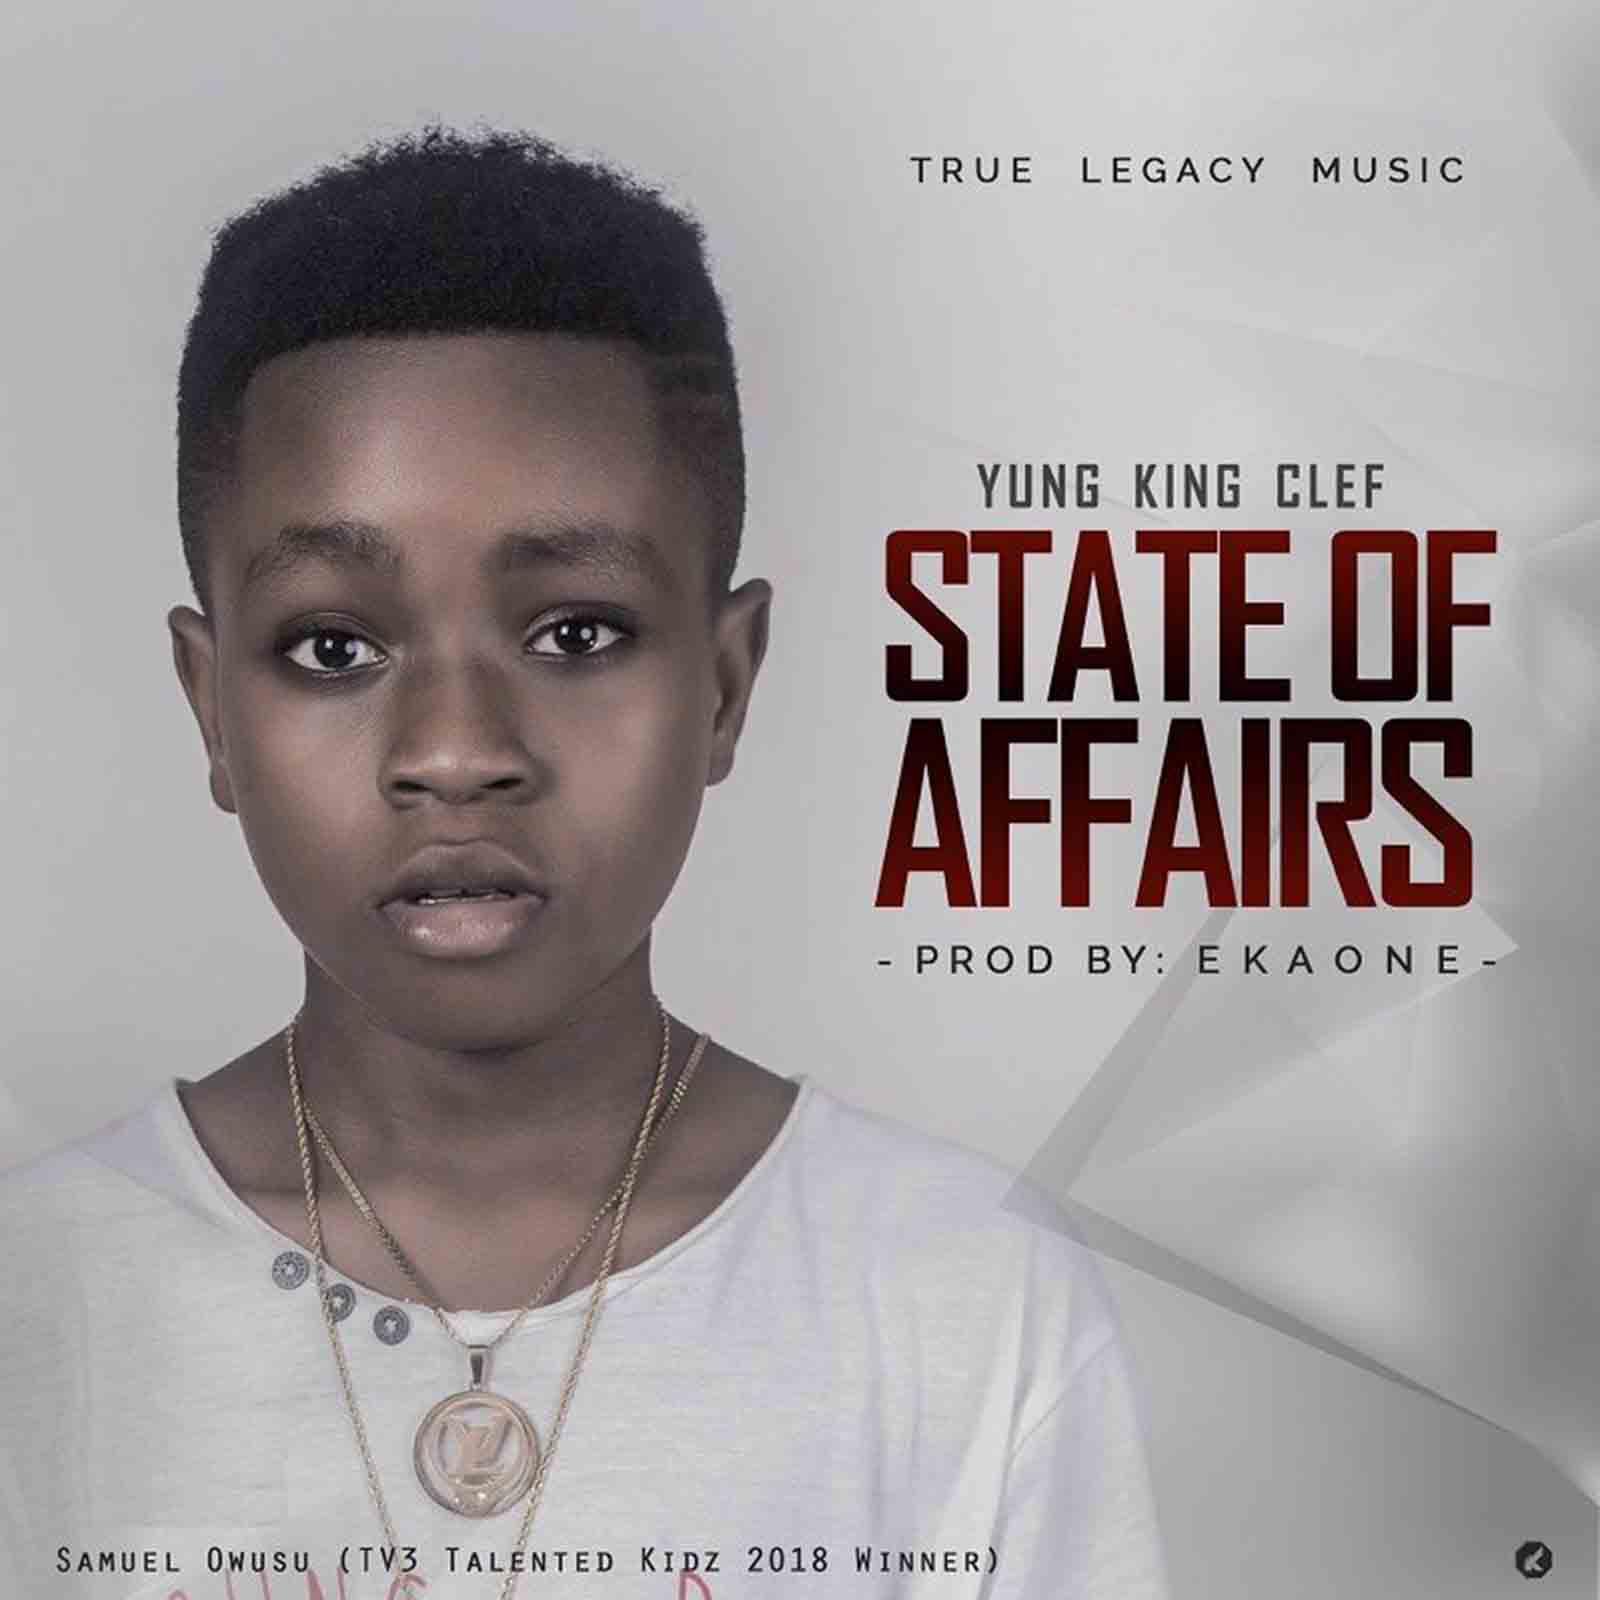 State of Affairs by Samuel Owusu